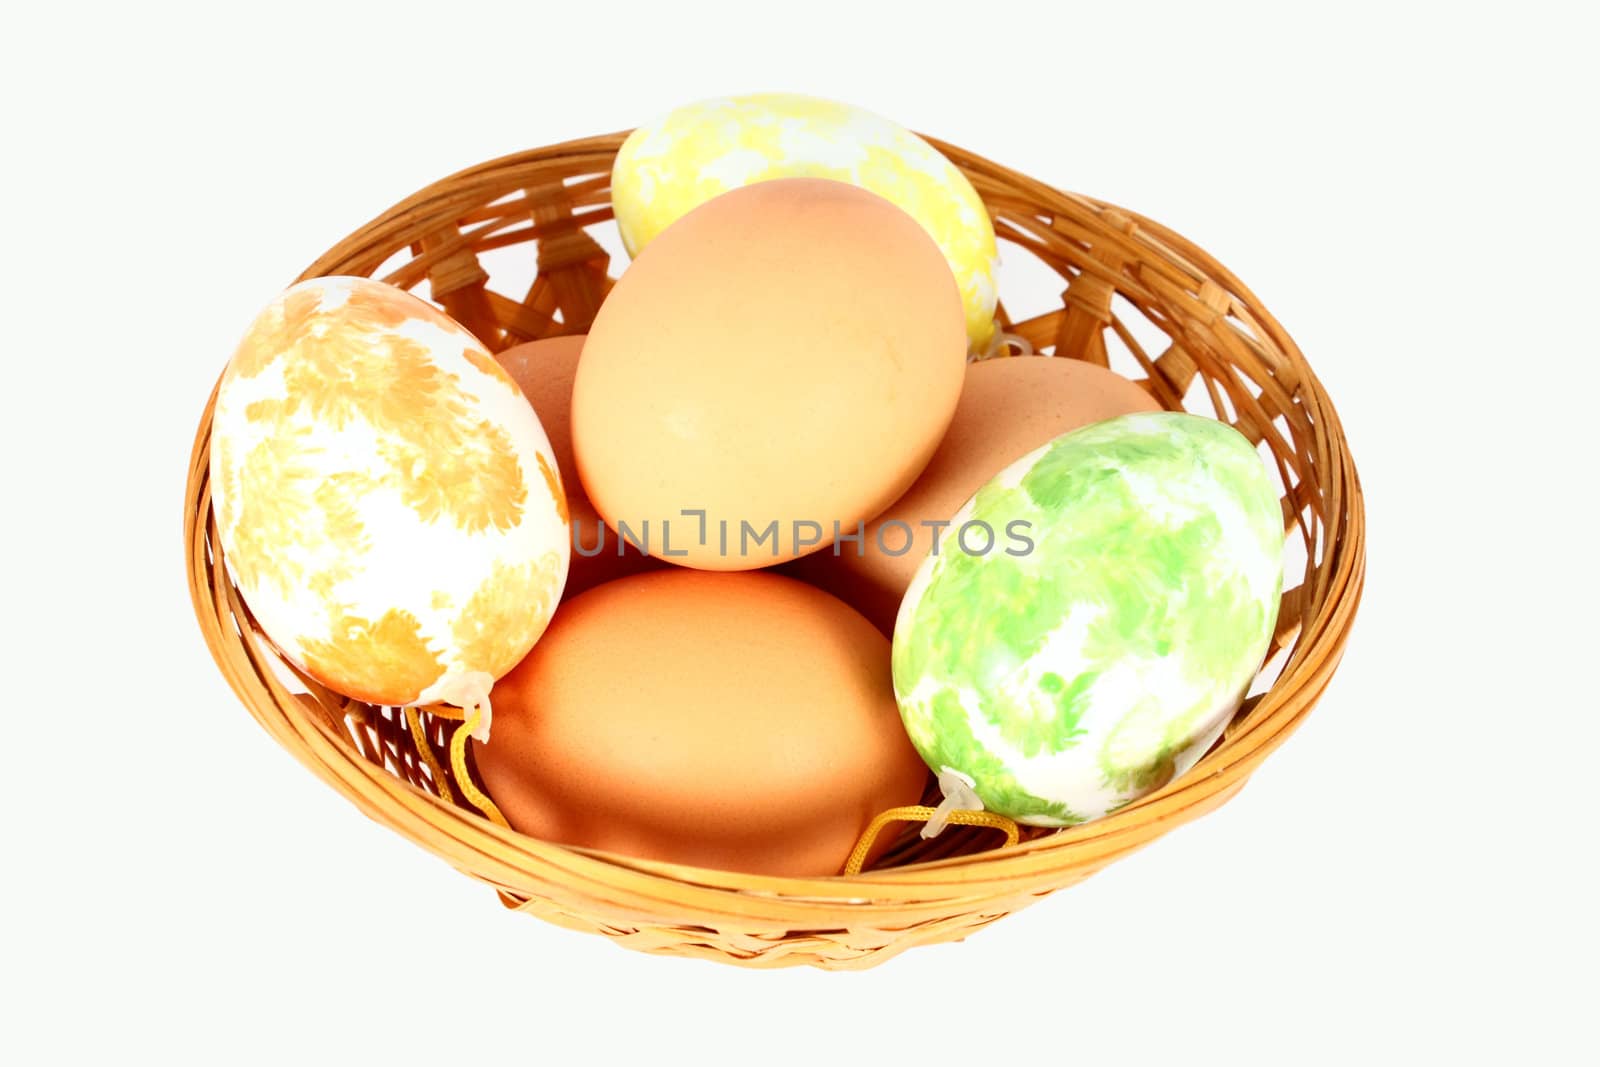 Basket containing easter eggs, isolated on white